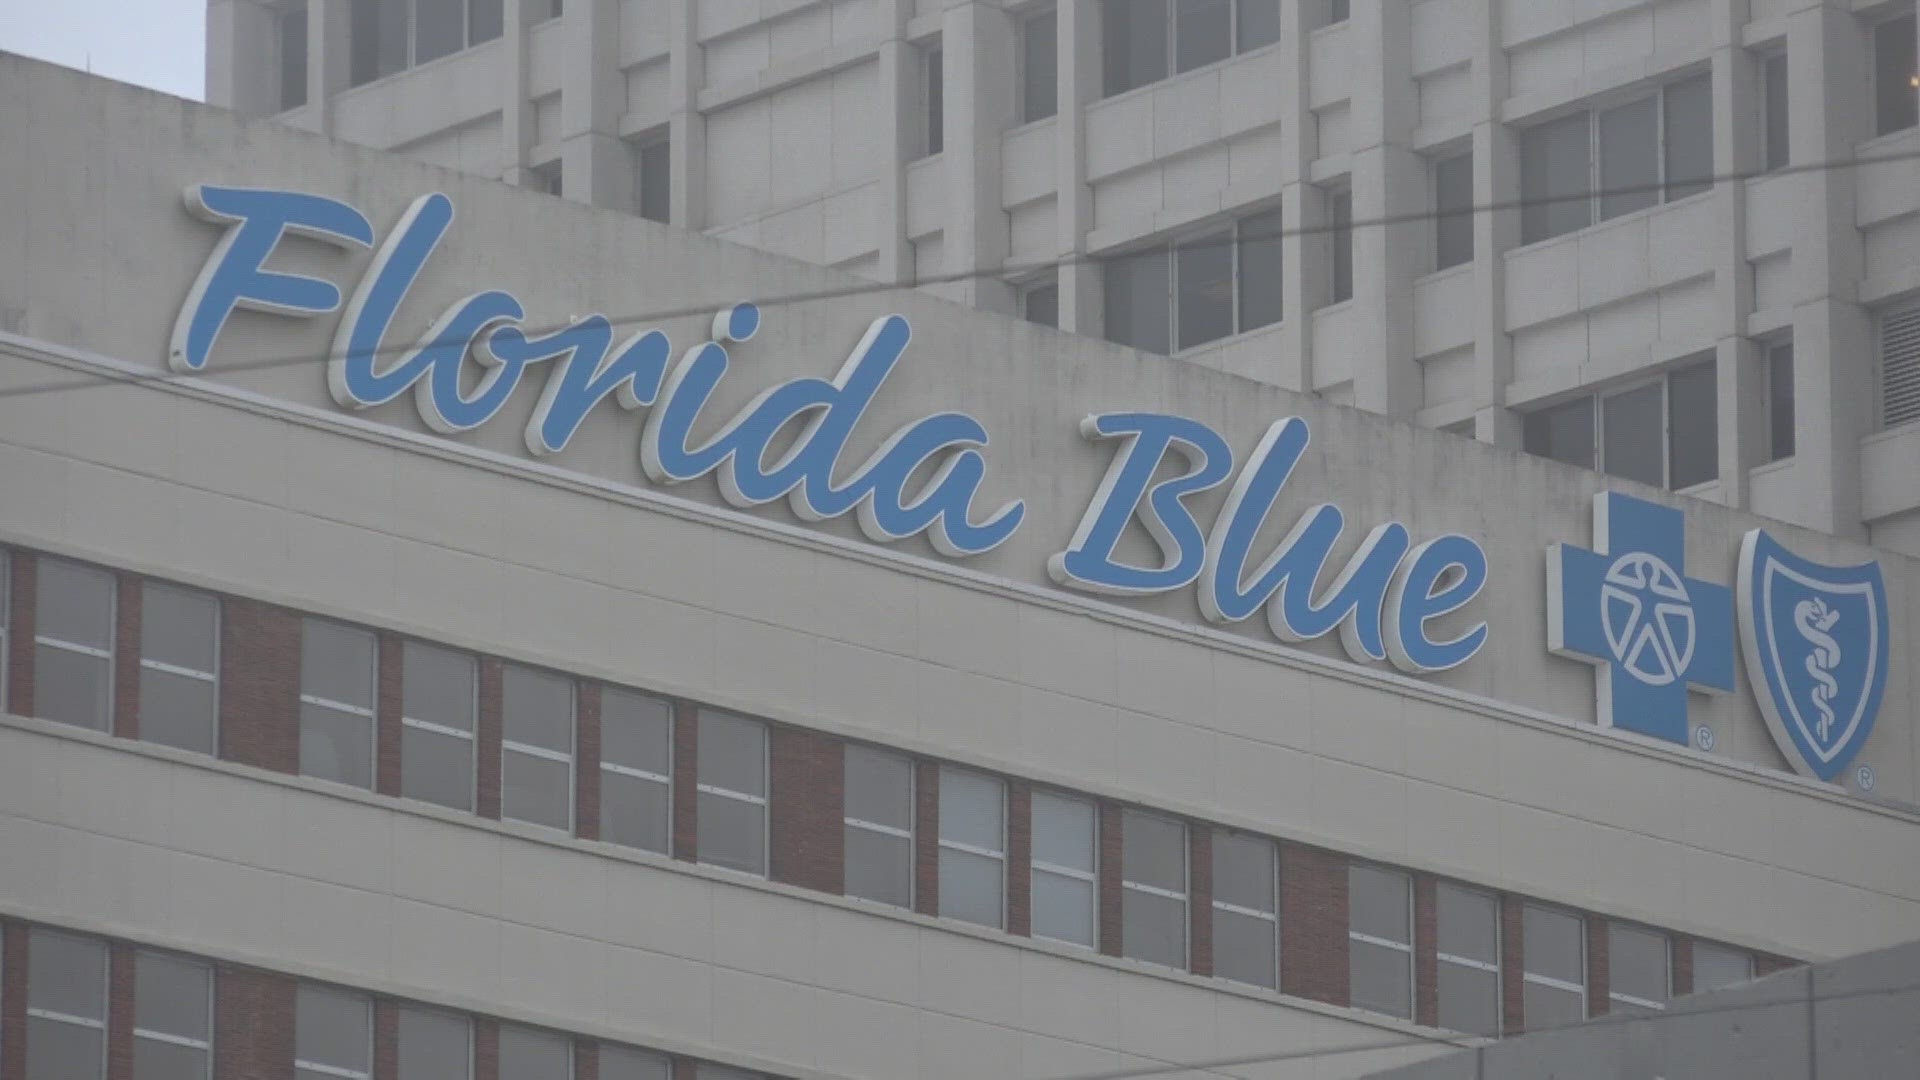 If the Sheriff's Office moved out of the Police Memorial Building, it would take about 80% of the Florida Blue building.